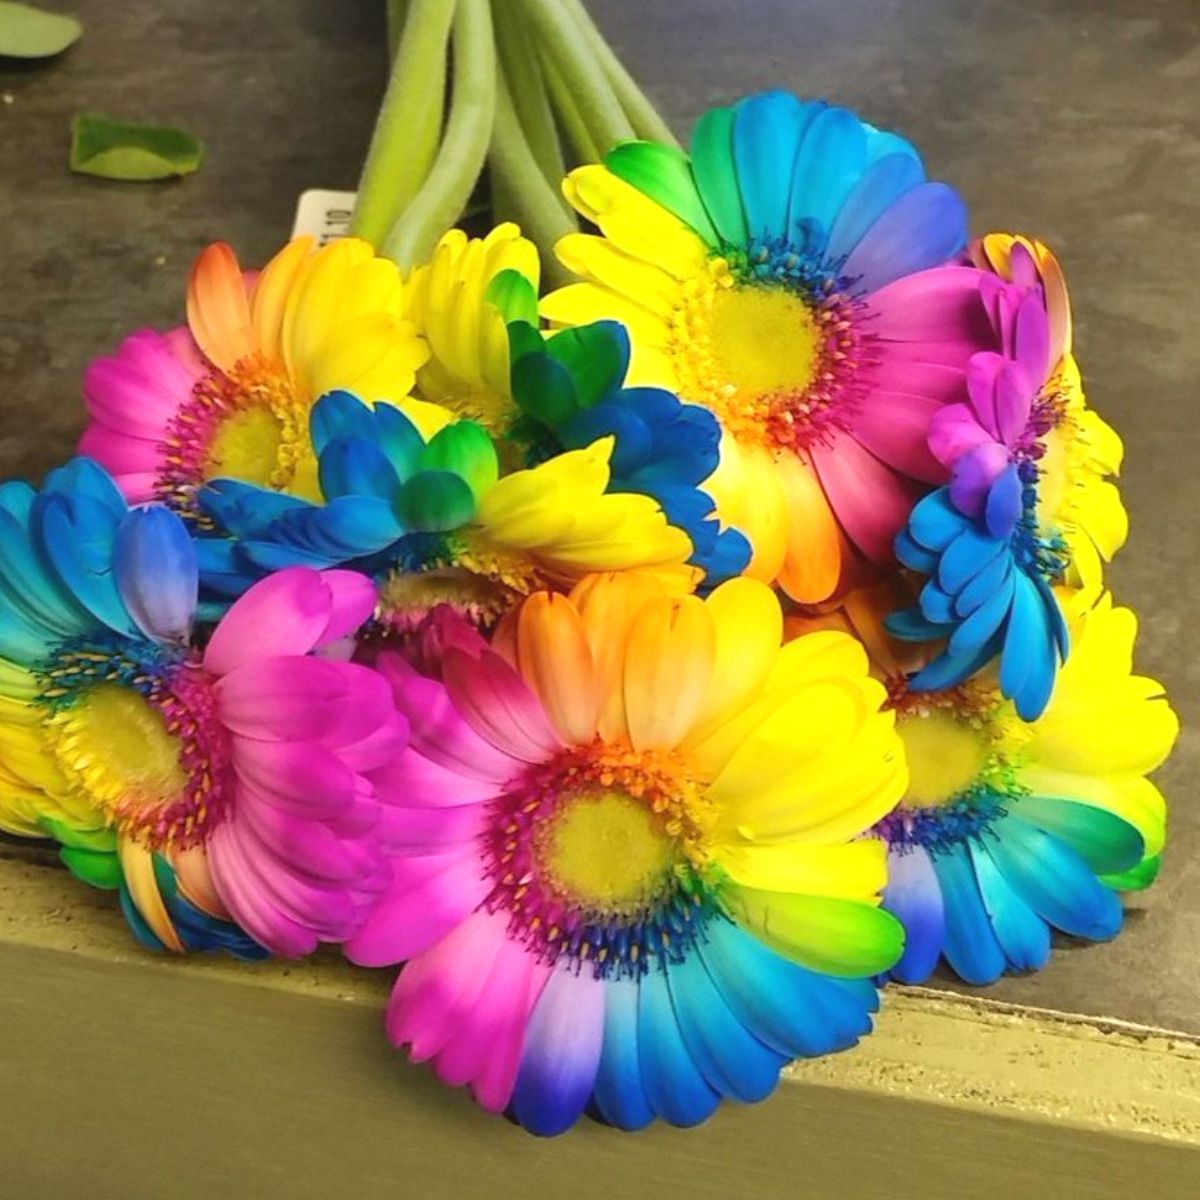 Peter Vrouwe - A plea for colored flowers - Rainbow Gerberas - on Thursd HIghlight